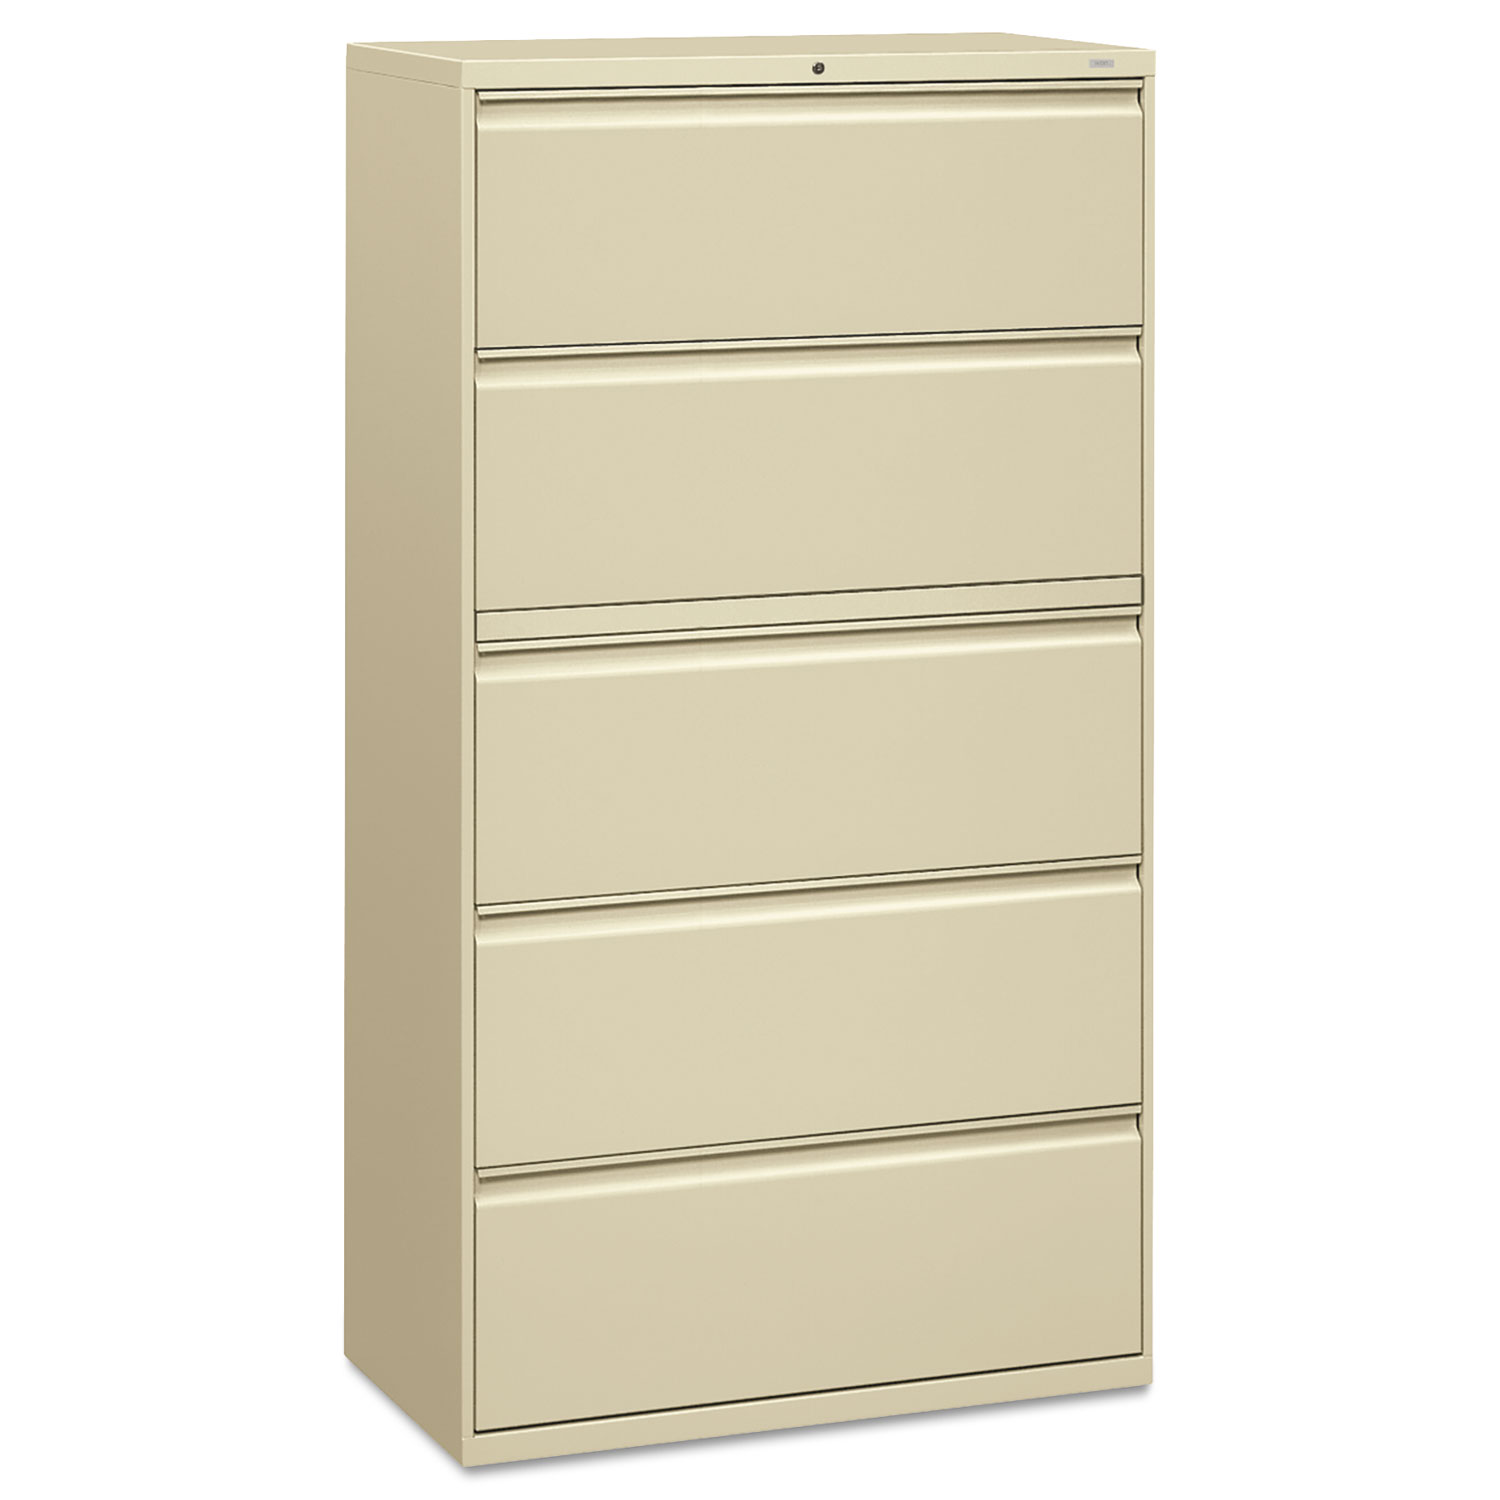 800 Series Five-Drawer Lateral File, Roll-Out/Posting Shelves, 36w x 67h, Putty